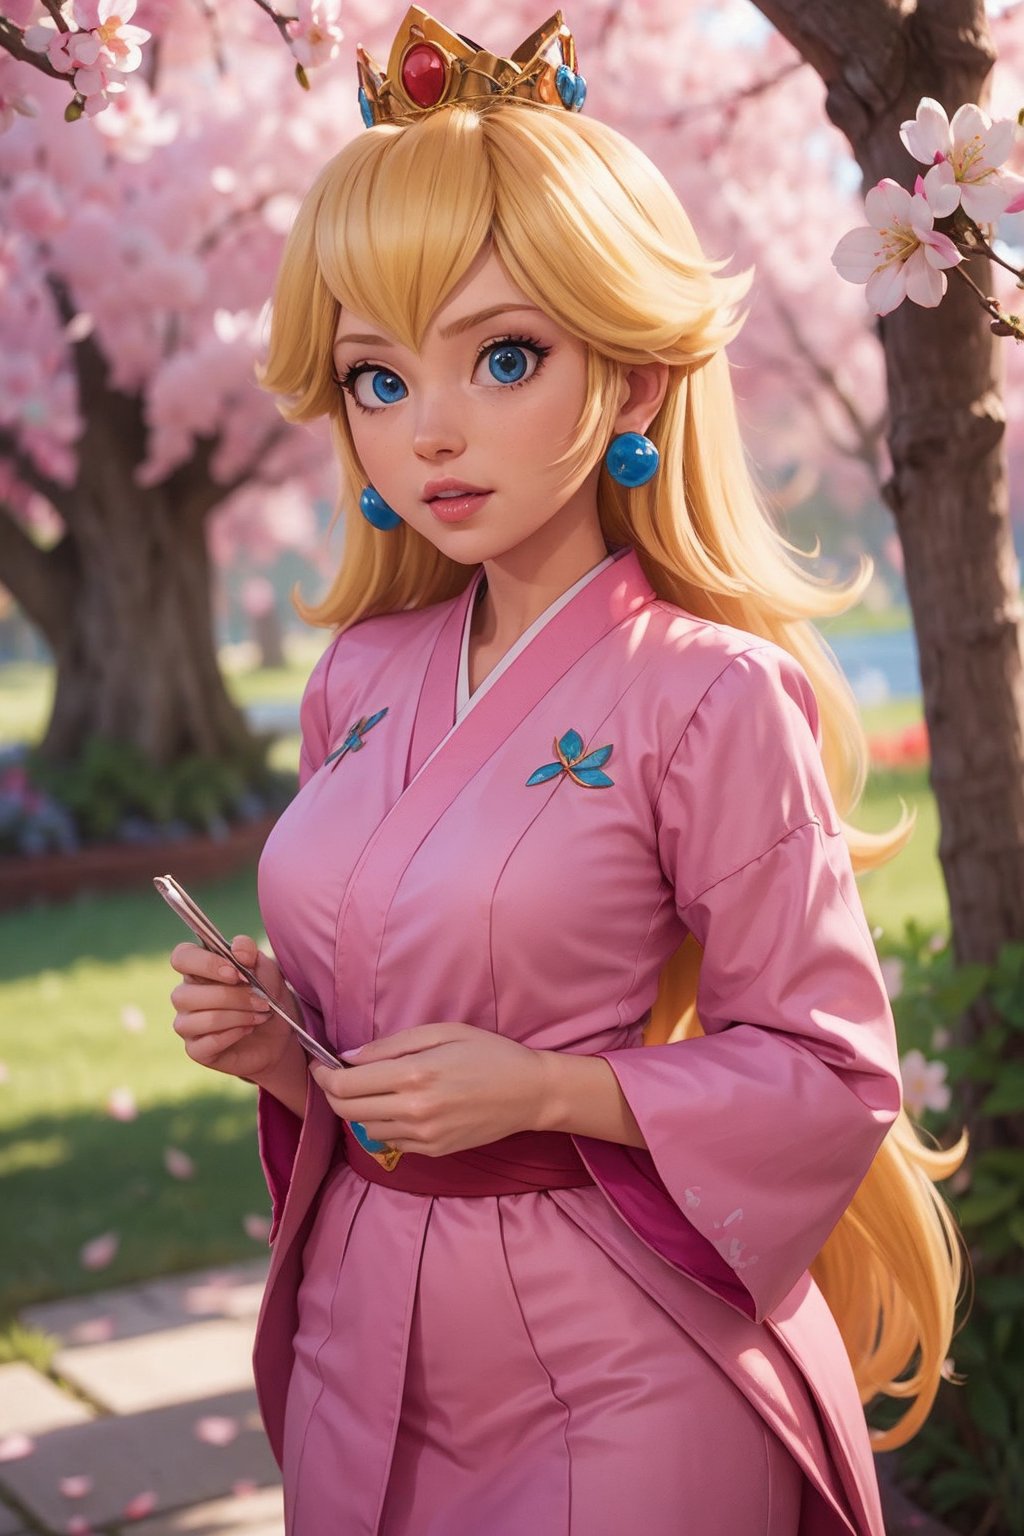 princess peach, hot, big_thighs, wearing pink kimono, 4K, at japan, complex background, cherry blossom hairpin, chest slit